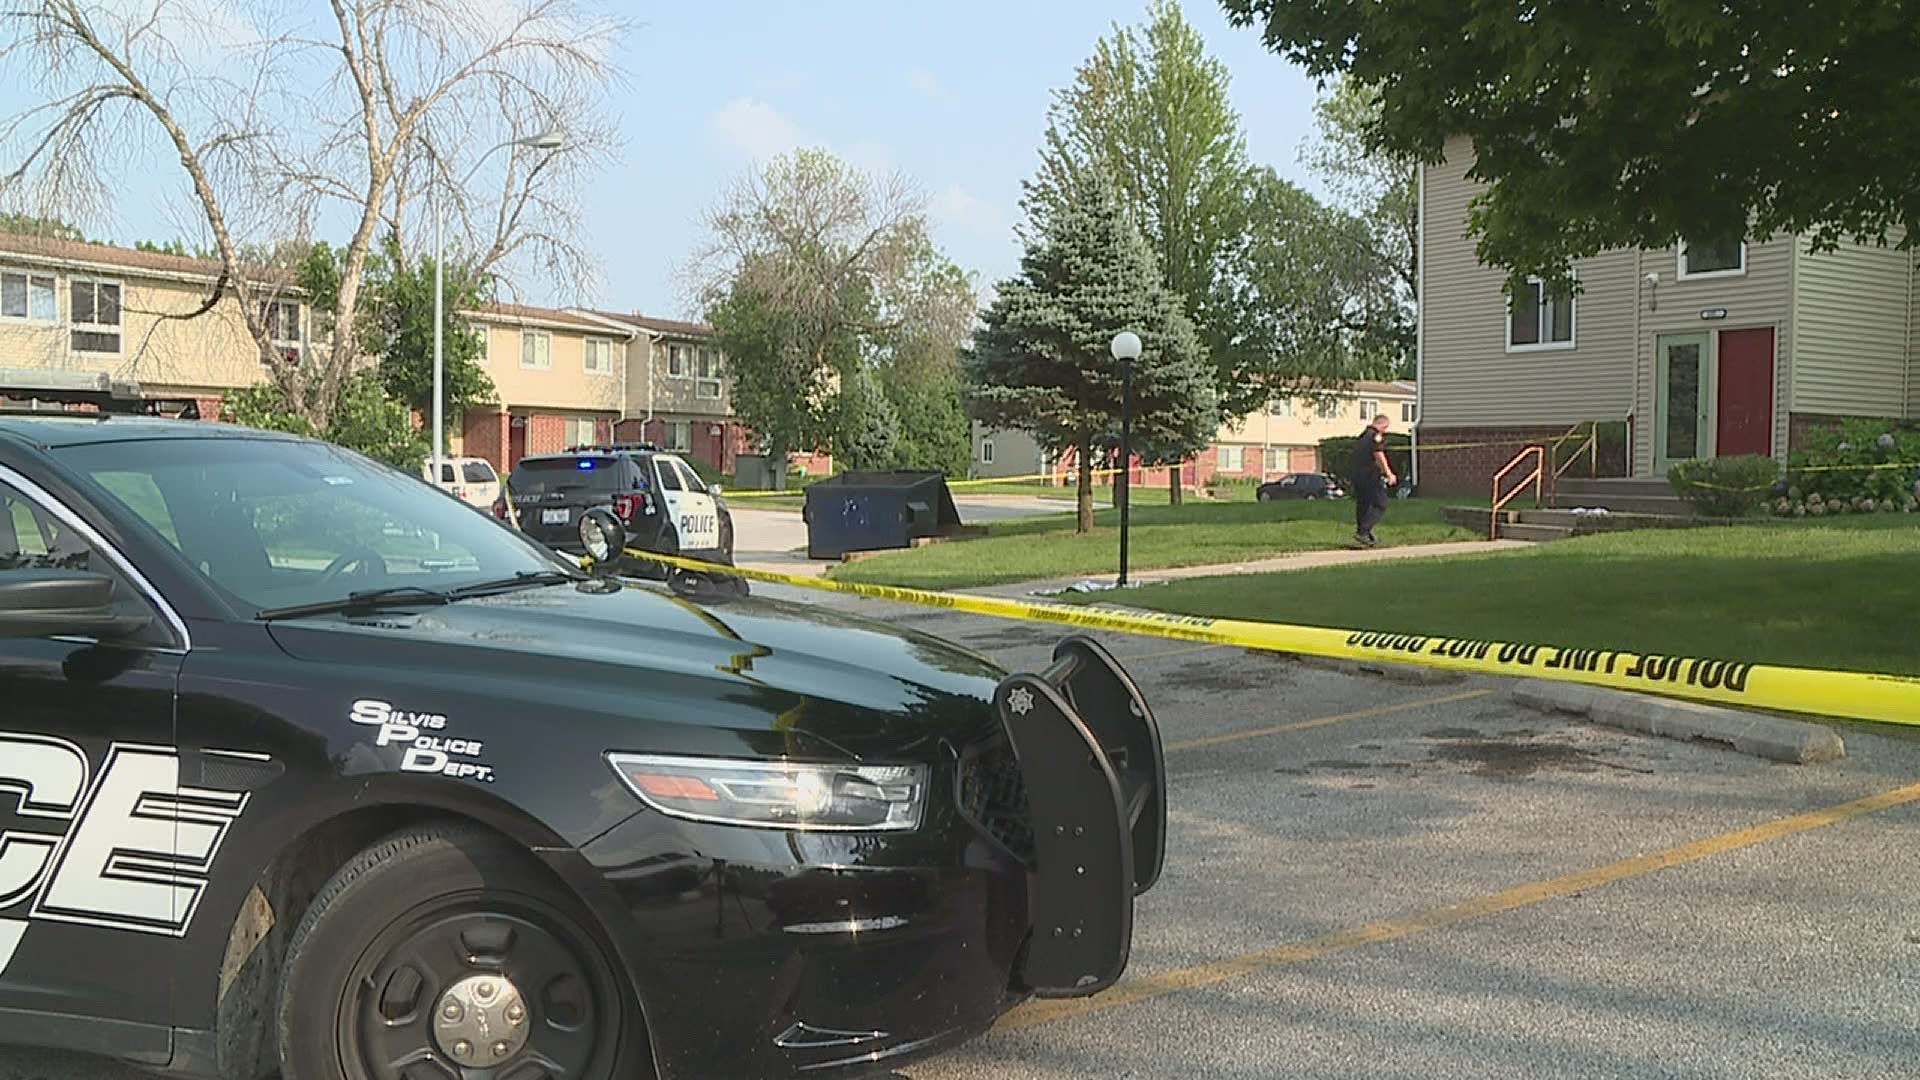 A young man was pronounced dead at the hospital after police discovered him injured by a gunshot in front of a Silvis apartment complex.